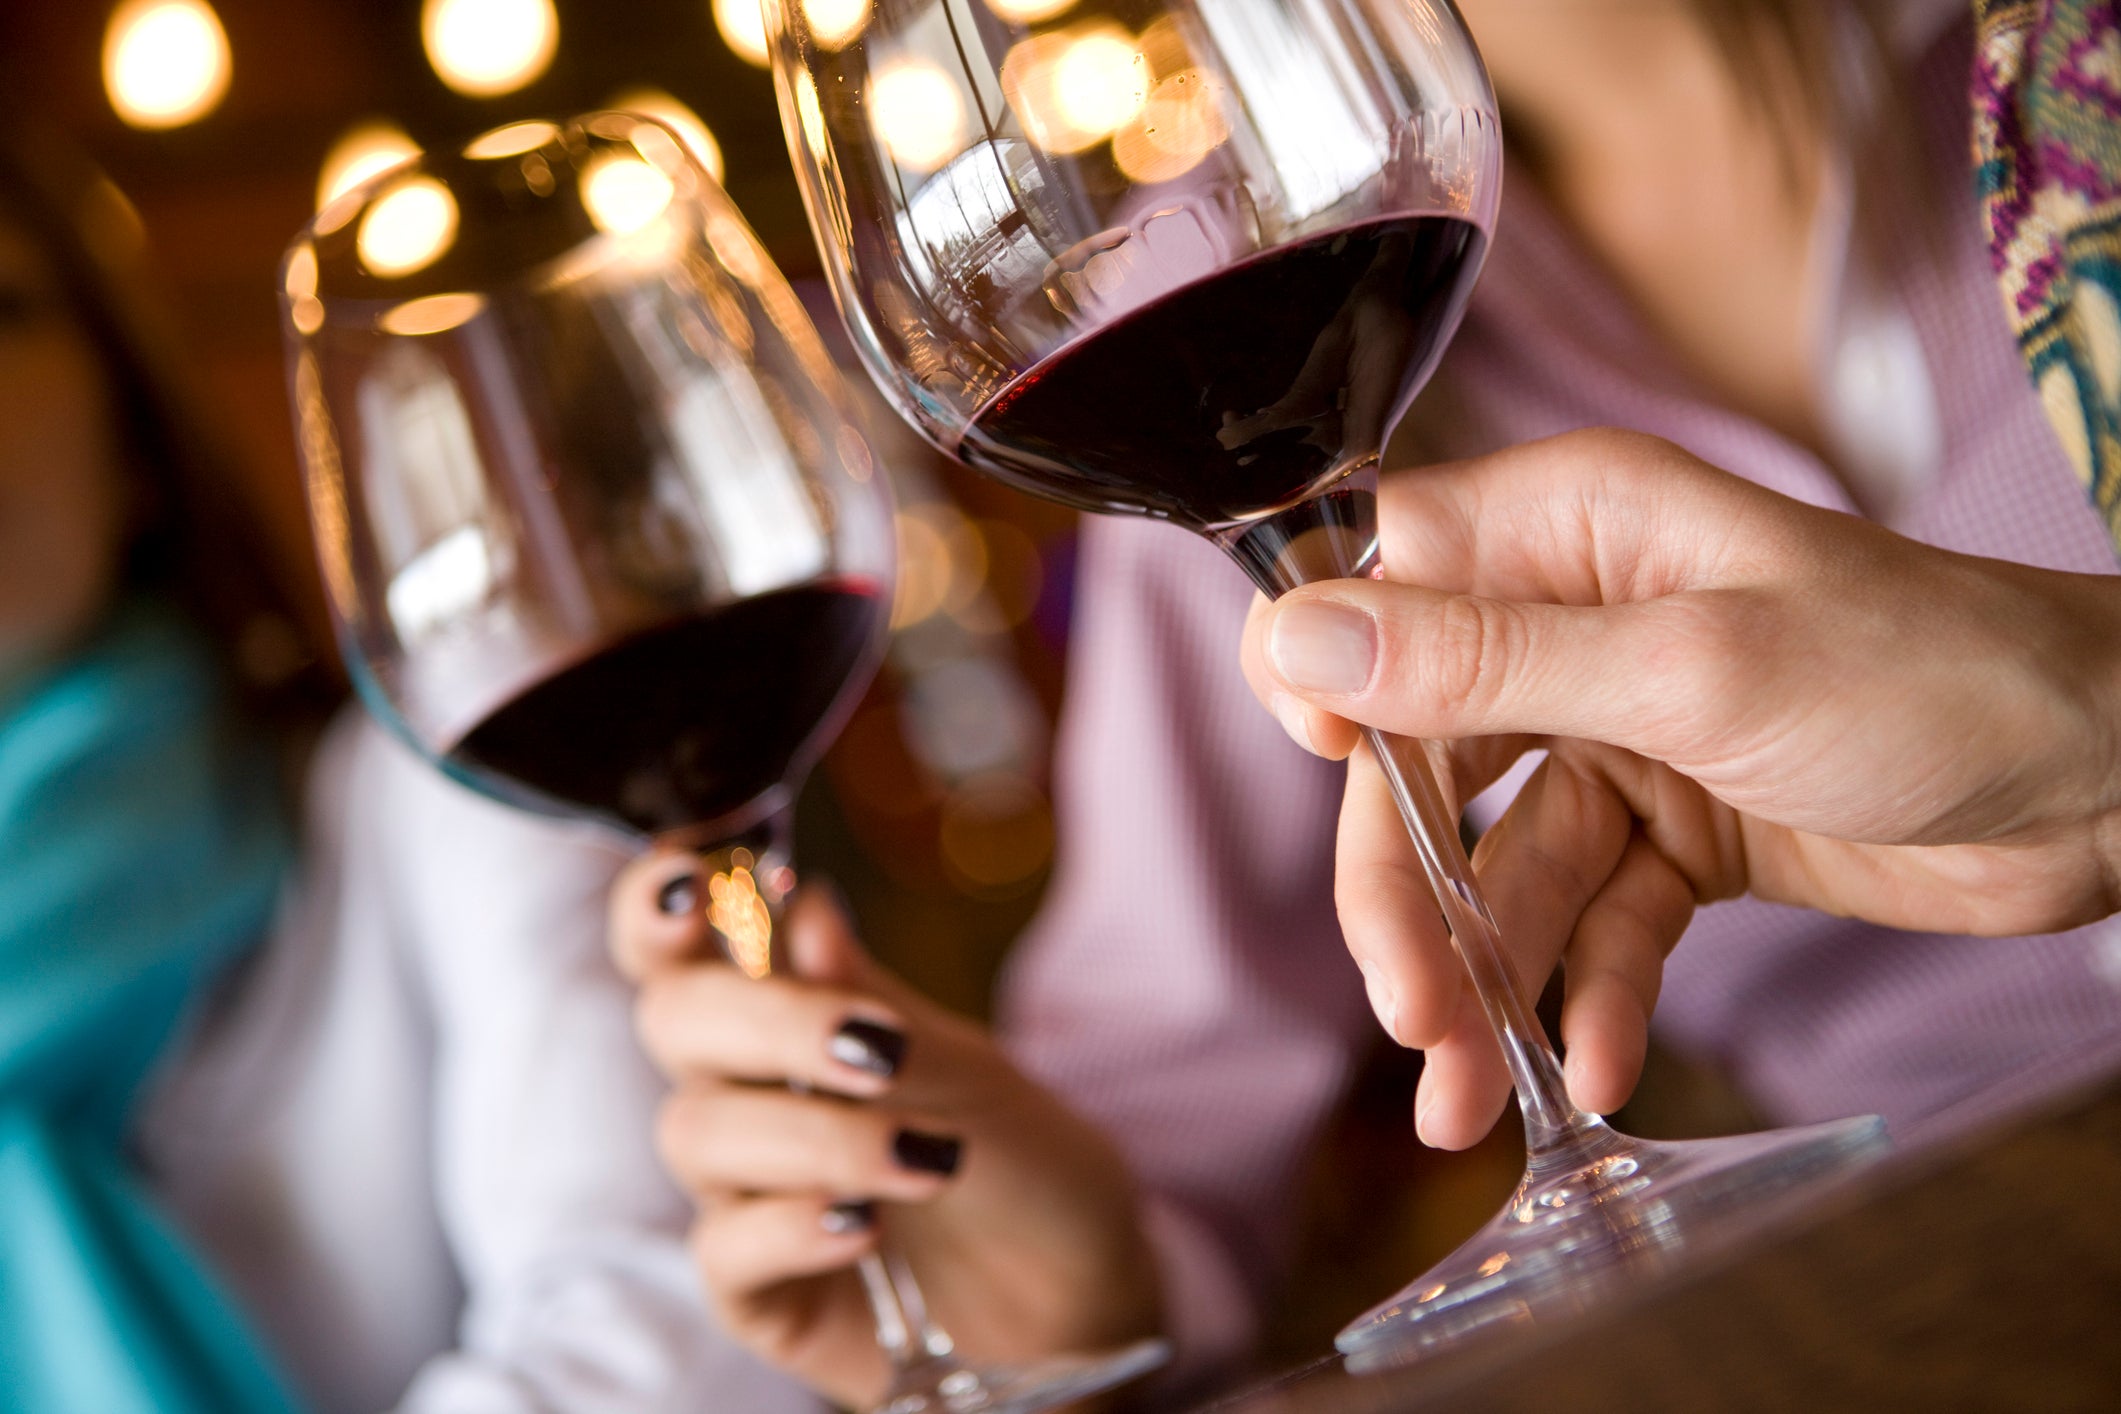 beskæftigelse egoisme teenagere Anti-inflammatory diet including chocolate, red wine and beer can help you  live longer, study claims | The Independent | The Independent